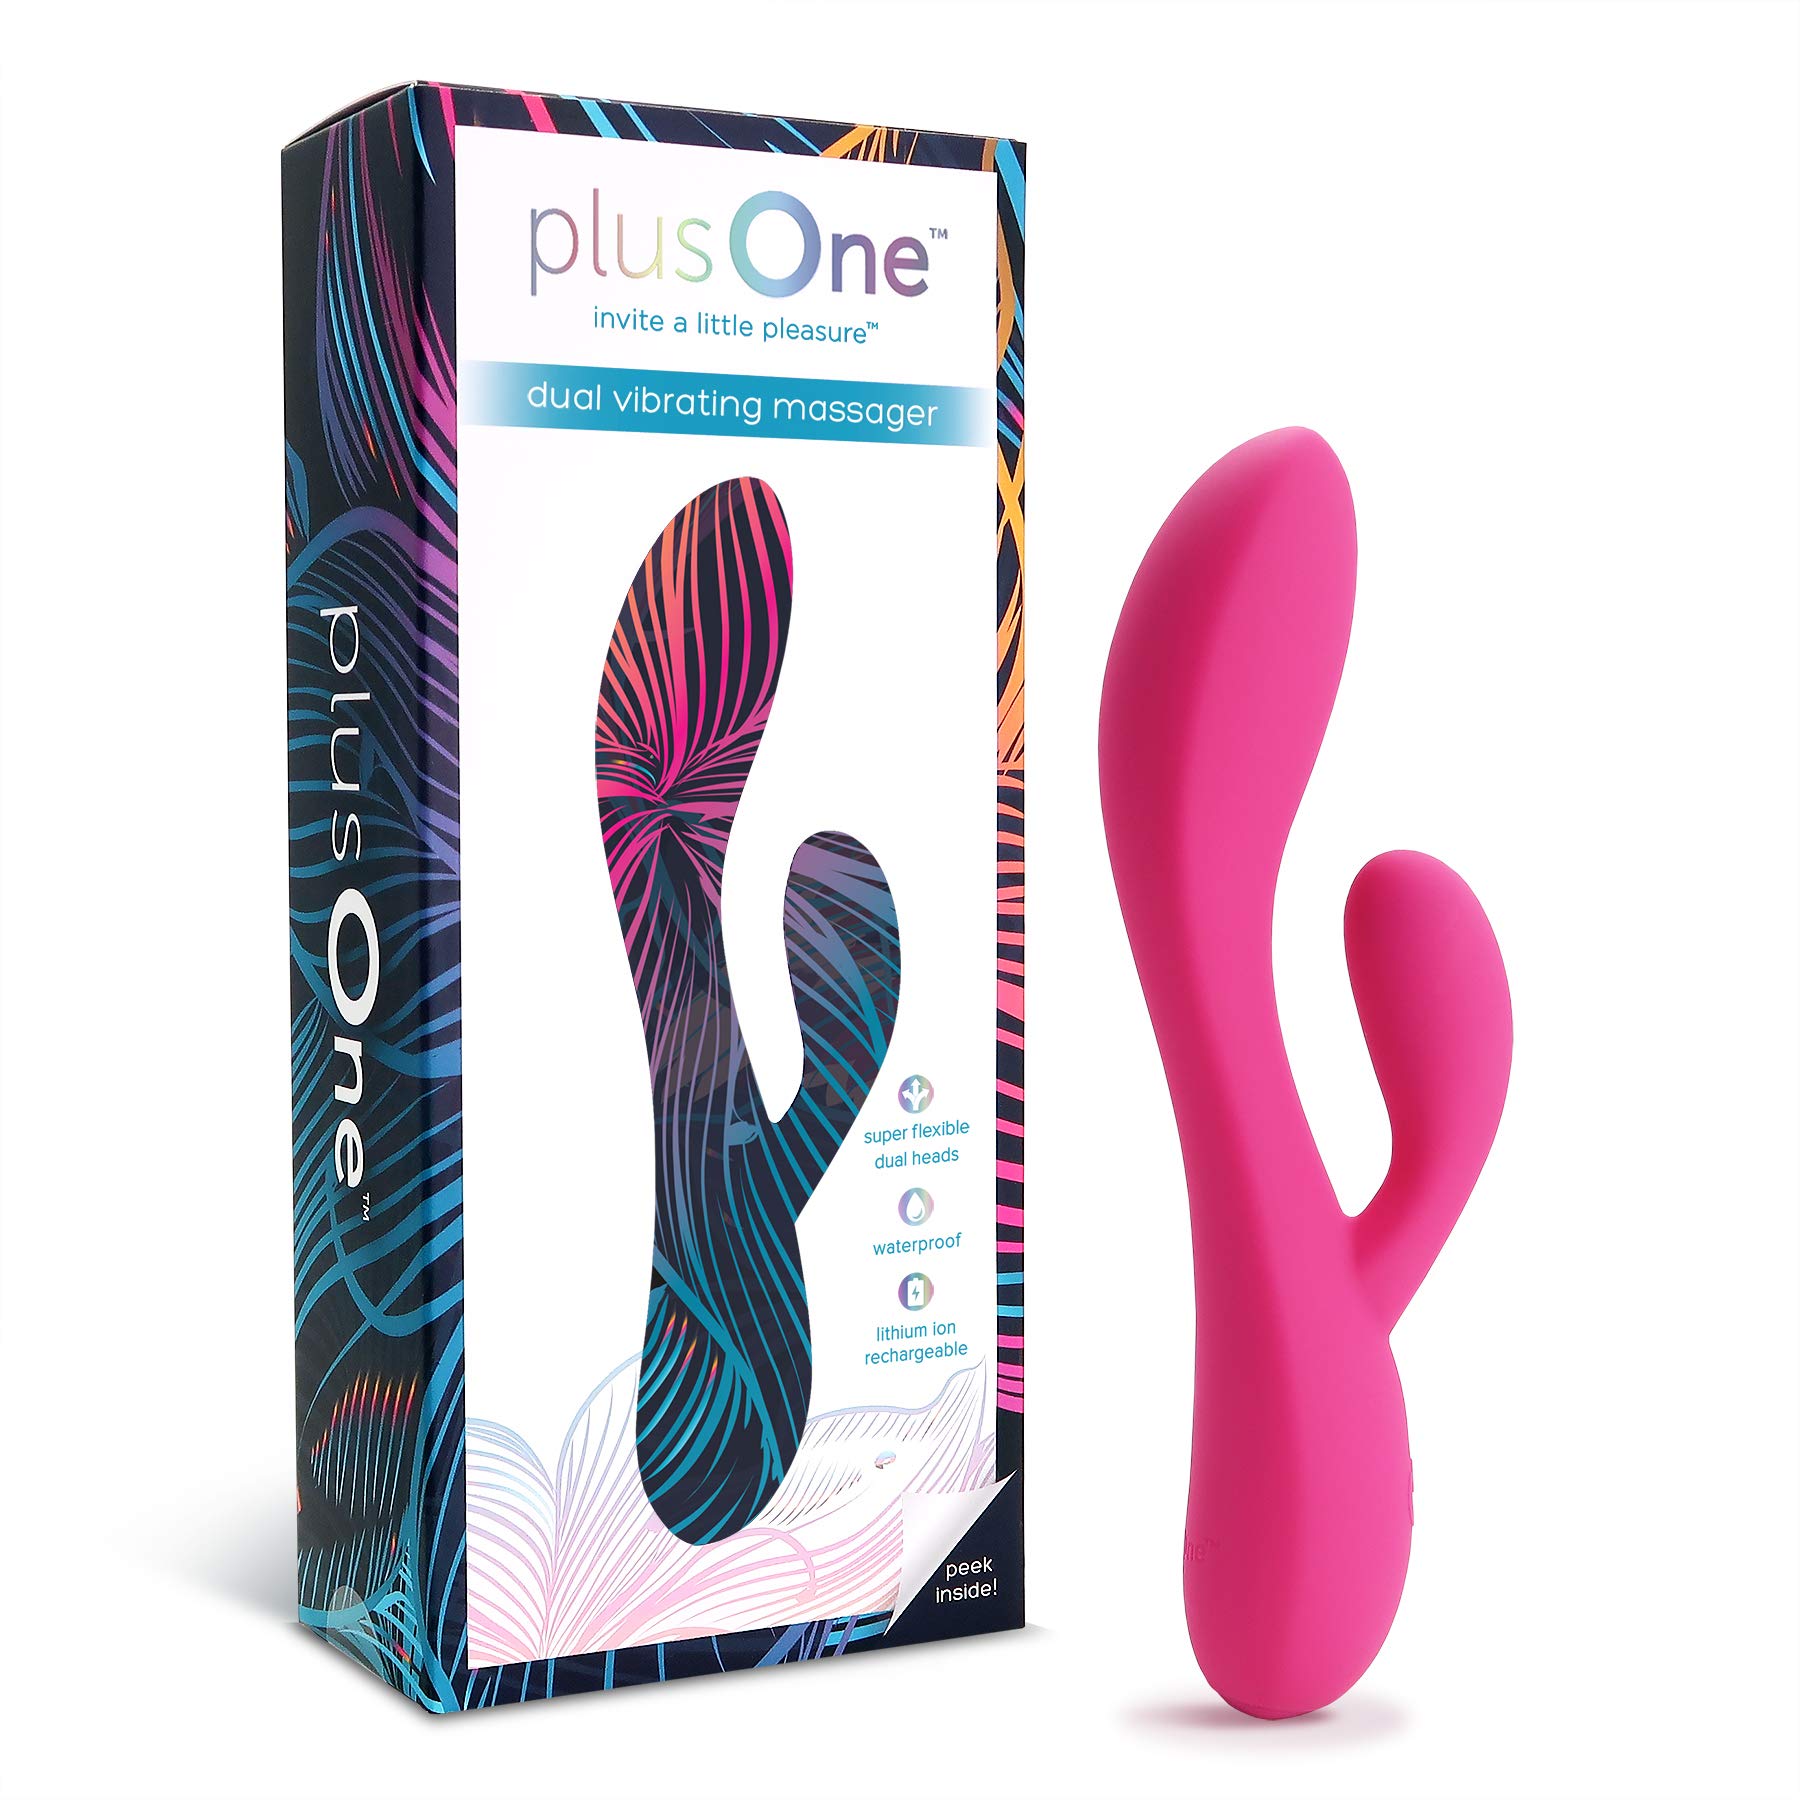 cire santos recommends plus one air pulser review pic